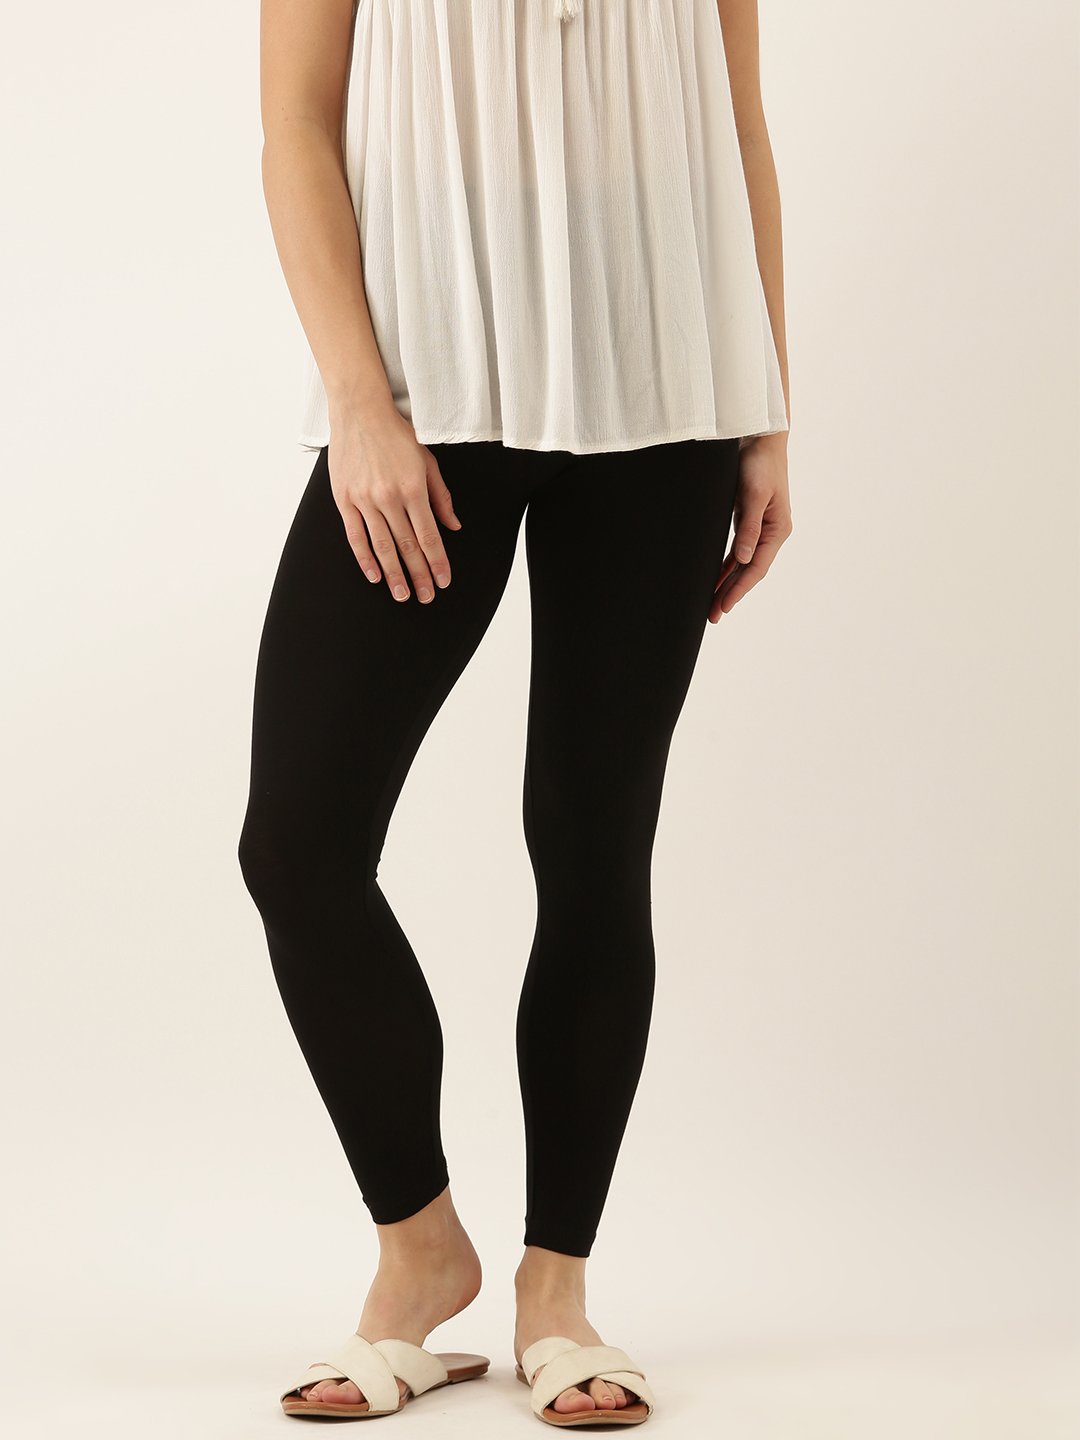 Buy TREND LEVEL Soft Stretchable Cotton Ankle Length Leggings for Women (S,  Black) at Amazon.in